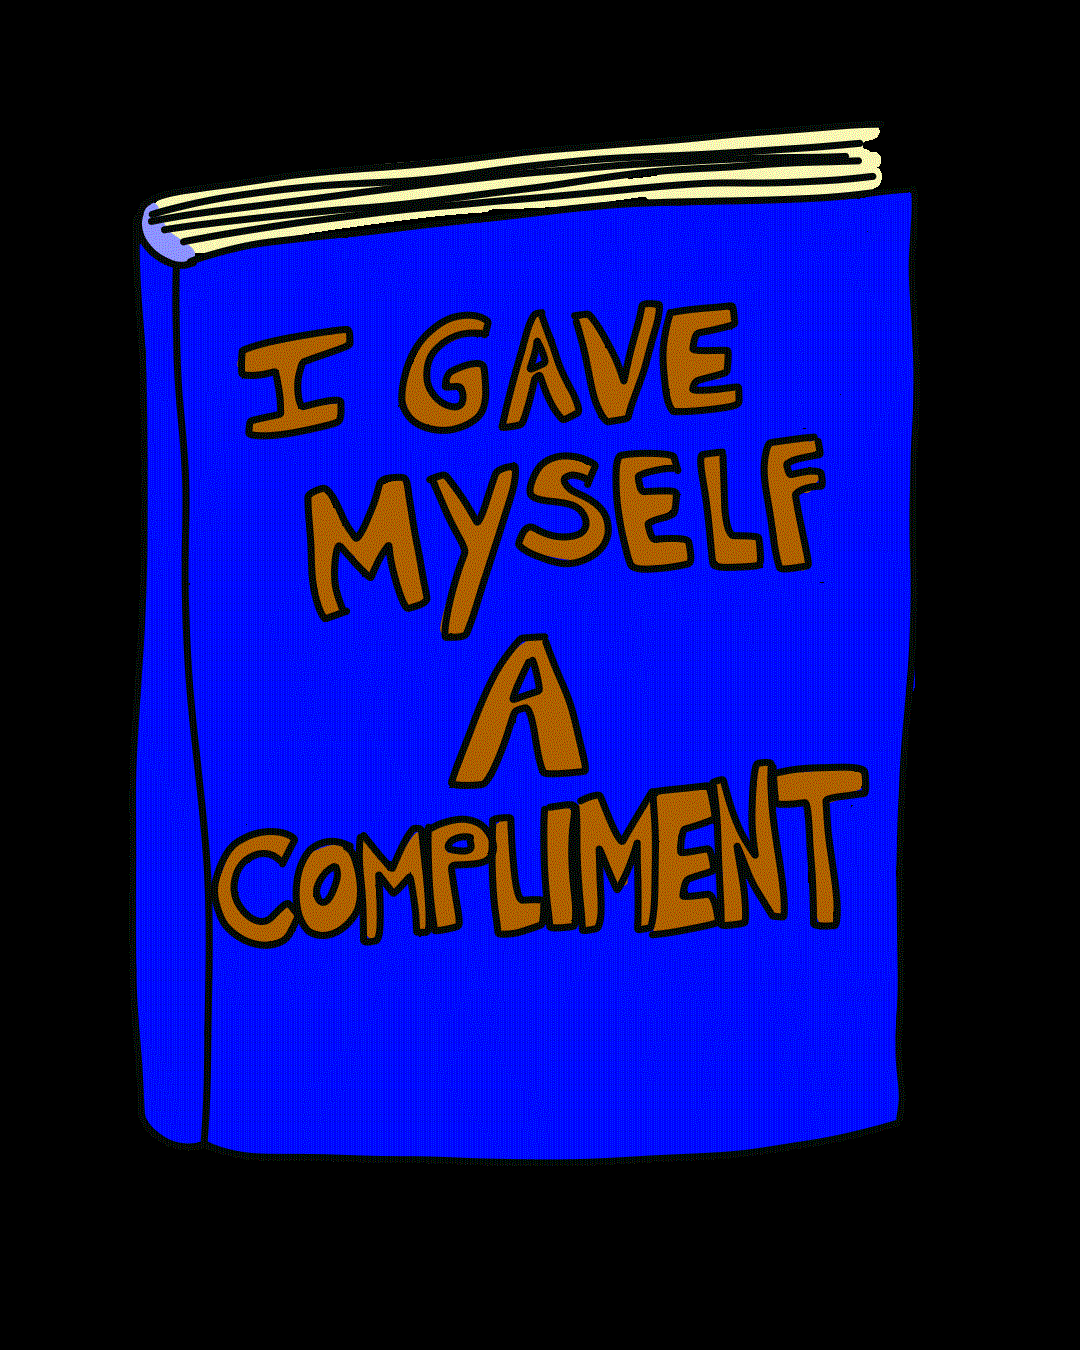 Book titled, "I gave myself a compliment"